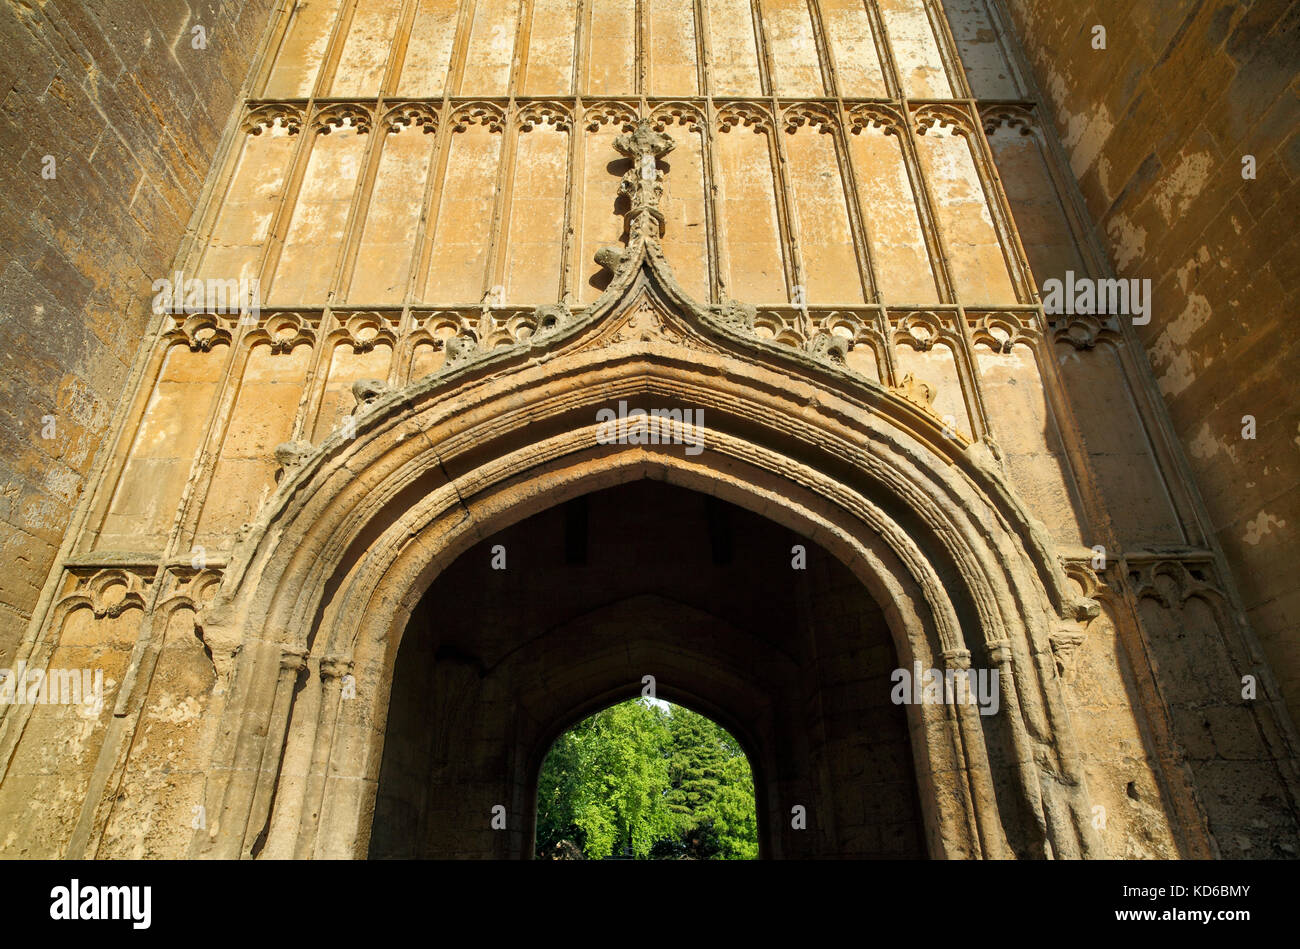 Archway through Evesham Bell Tower, Evesham, Worcestershire. Early C16. Perpendicular gothic. Stock Photo